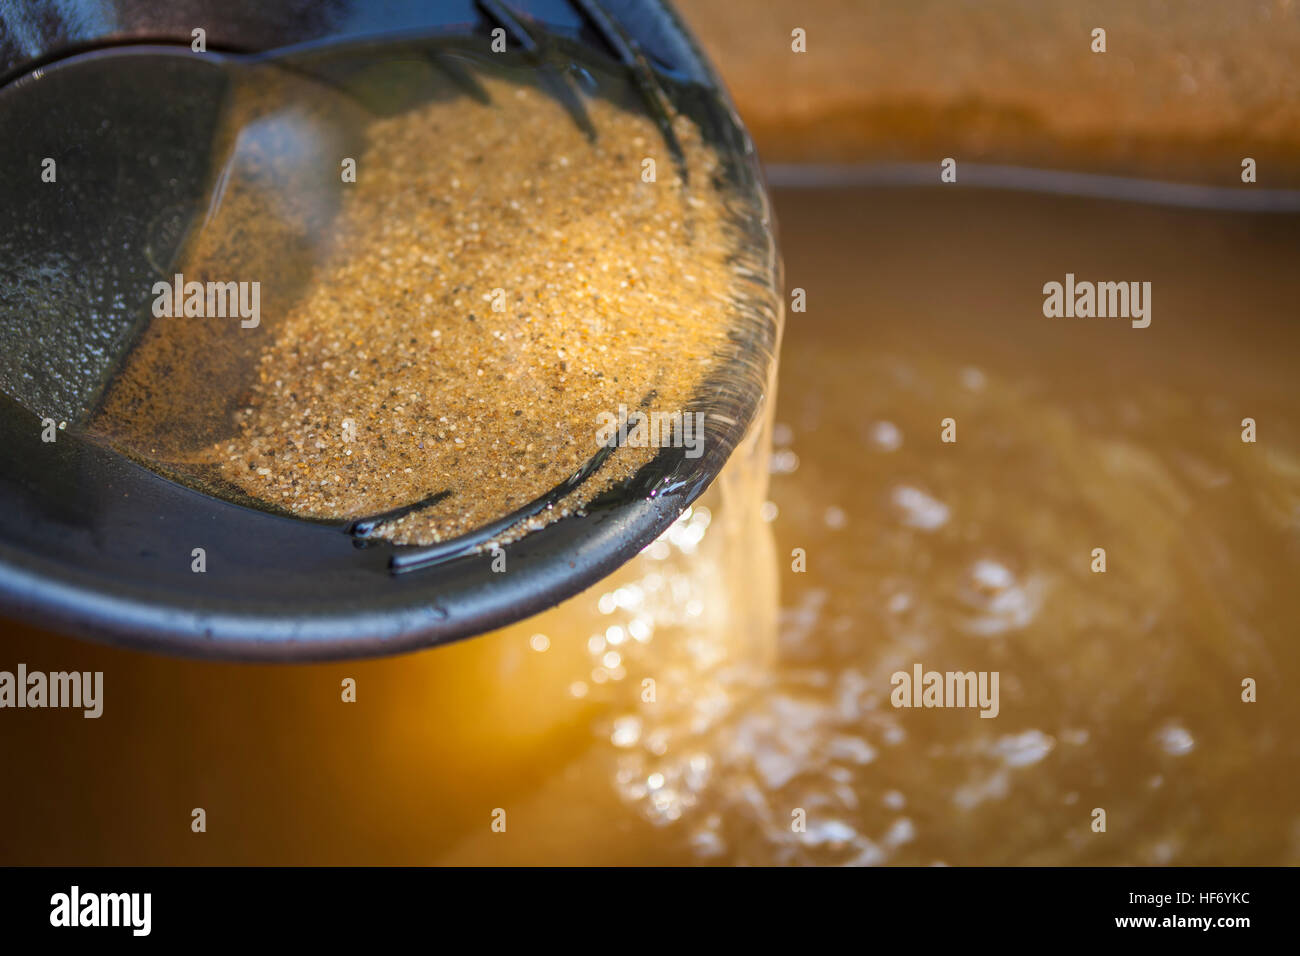 Close up of gold panning pan with sifting sand. Shallow depth of field with focus on sand flowing over edge of pan into water. Stock Photo